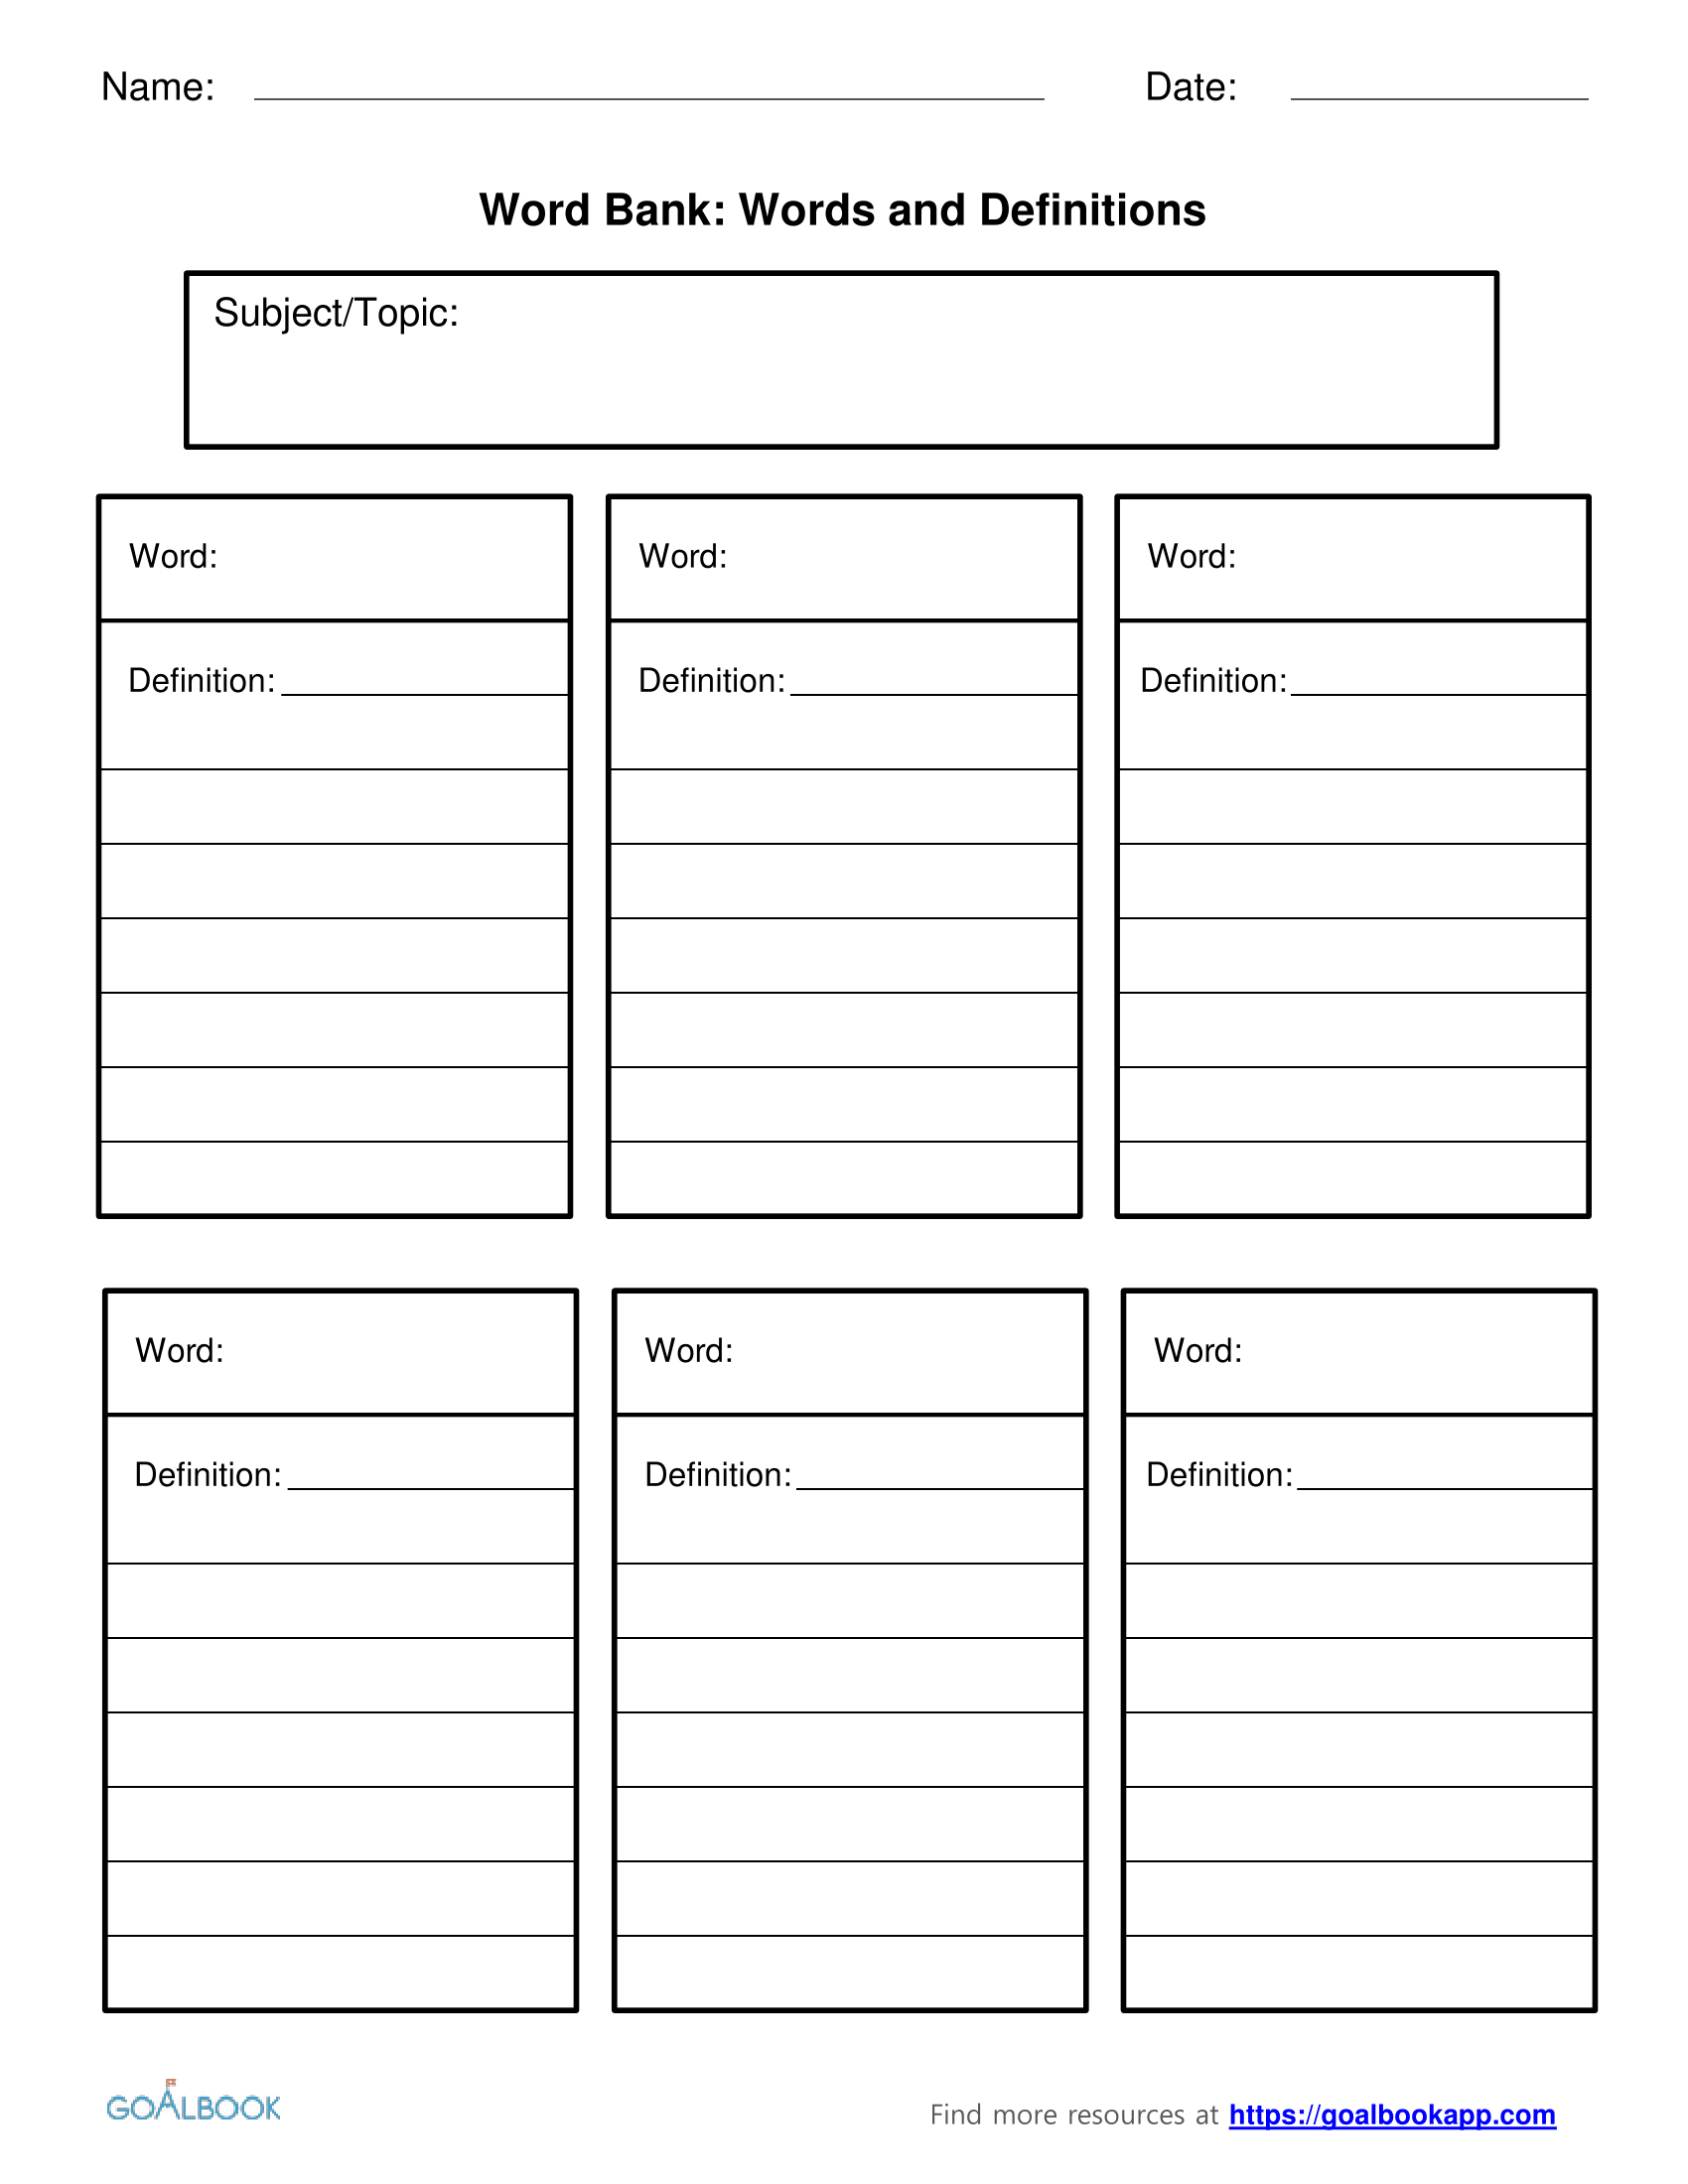 Word Bank | Udl Strategies – Goalbook Toolkit Pertaining To Personal Word Wall Template